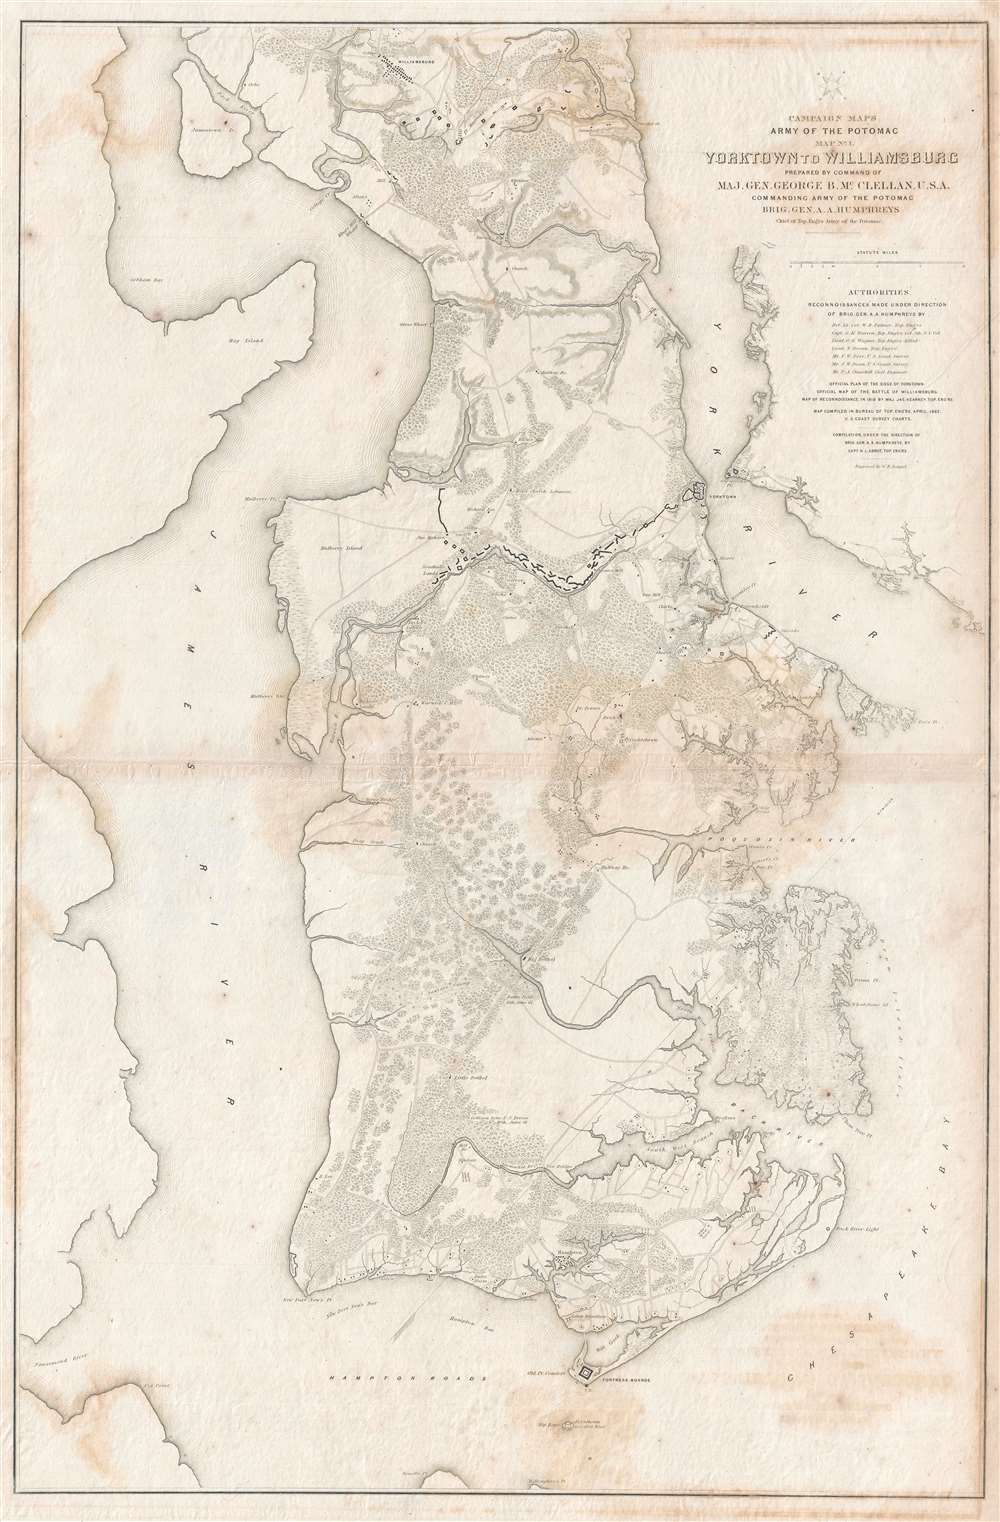 Campaign Maps Army of the Potomac Map No. 1 Yorktown to Williamsburg Prepared by Command of Maj. Gen. George B. McClellan, U.S.A. - Main View